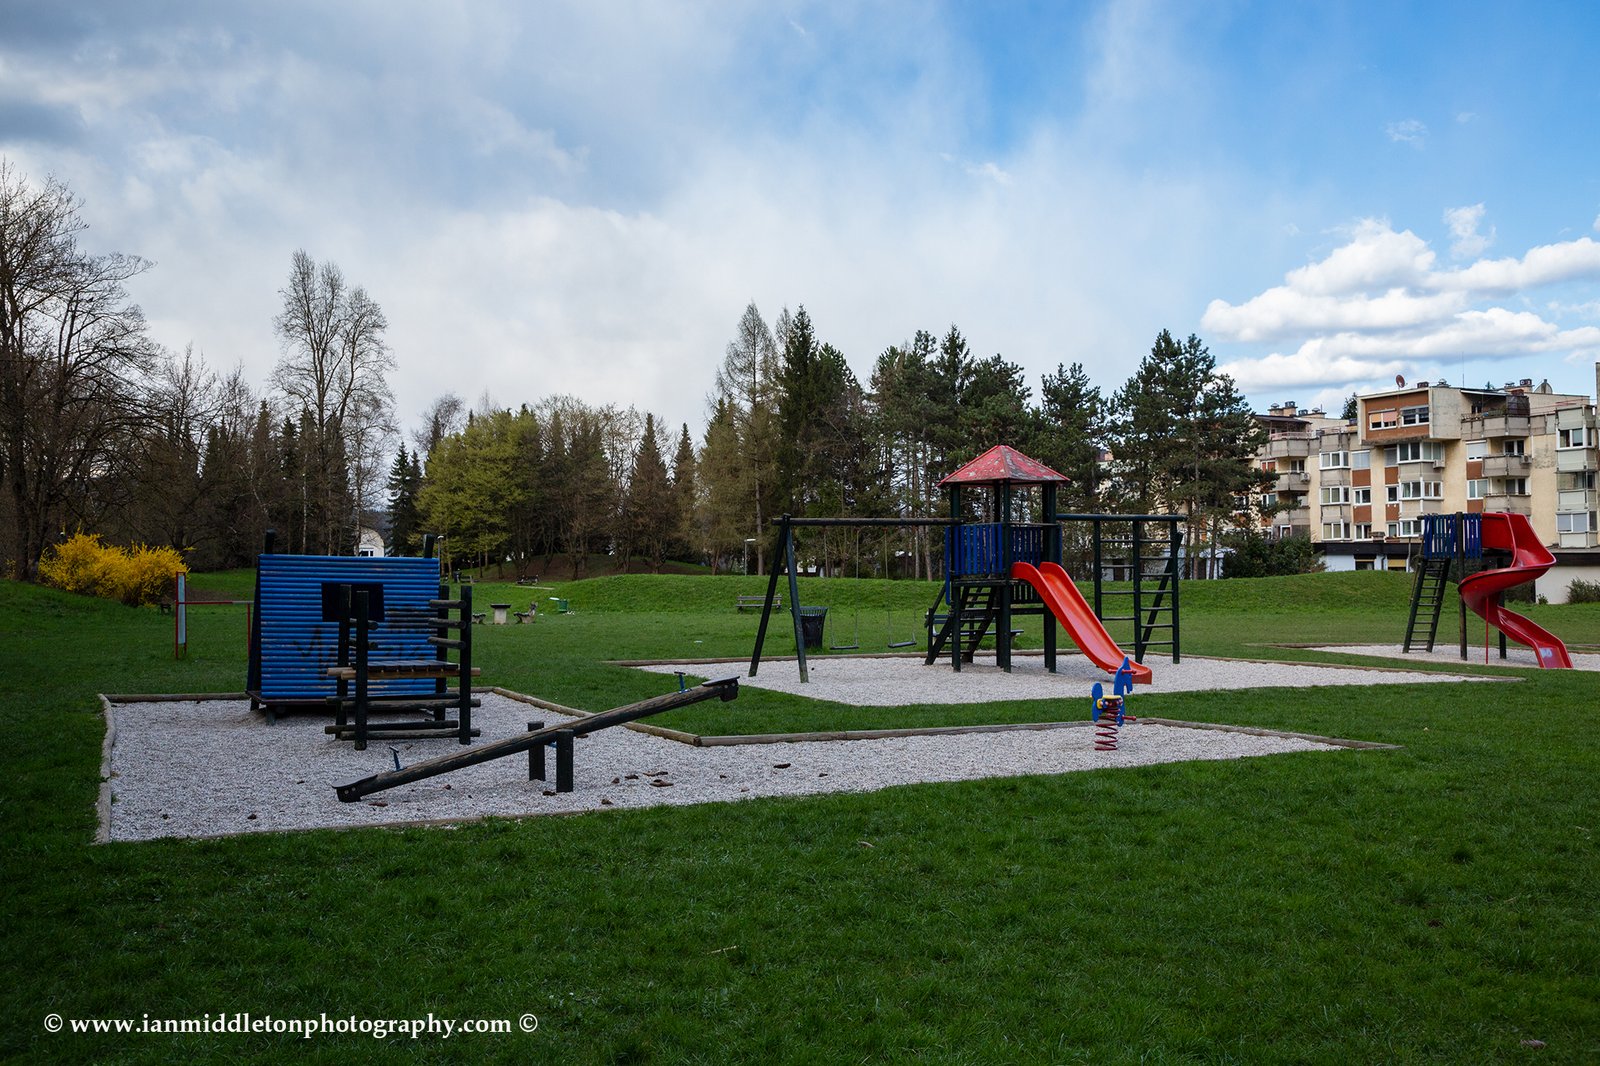 In Slovenia the government has forbidden the use of public playgrounds and all schools are closed.